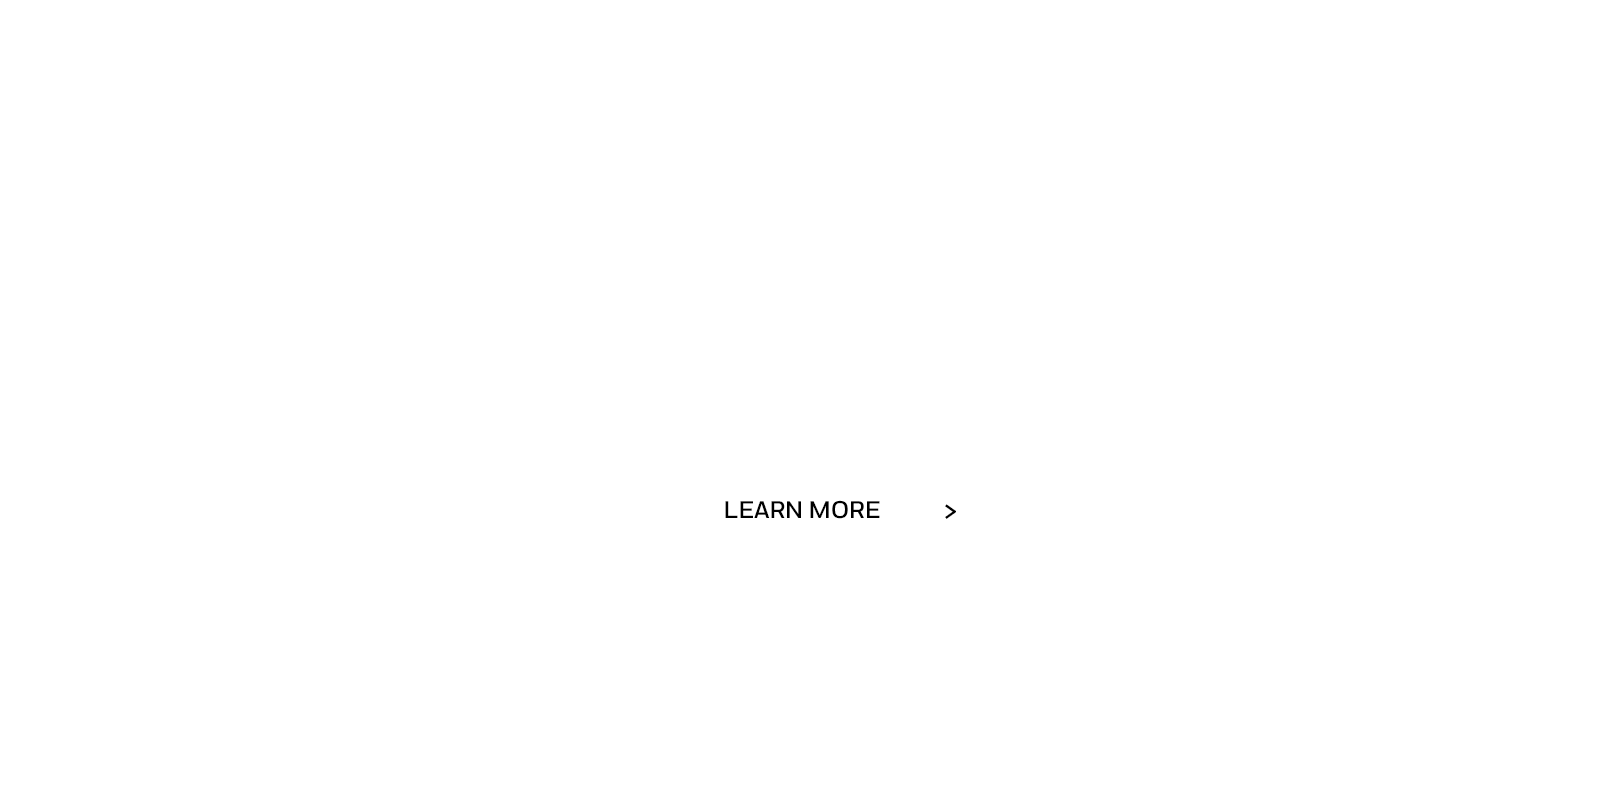 faq quick and simple answers to your most-asked questions learn more